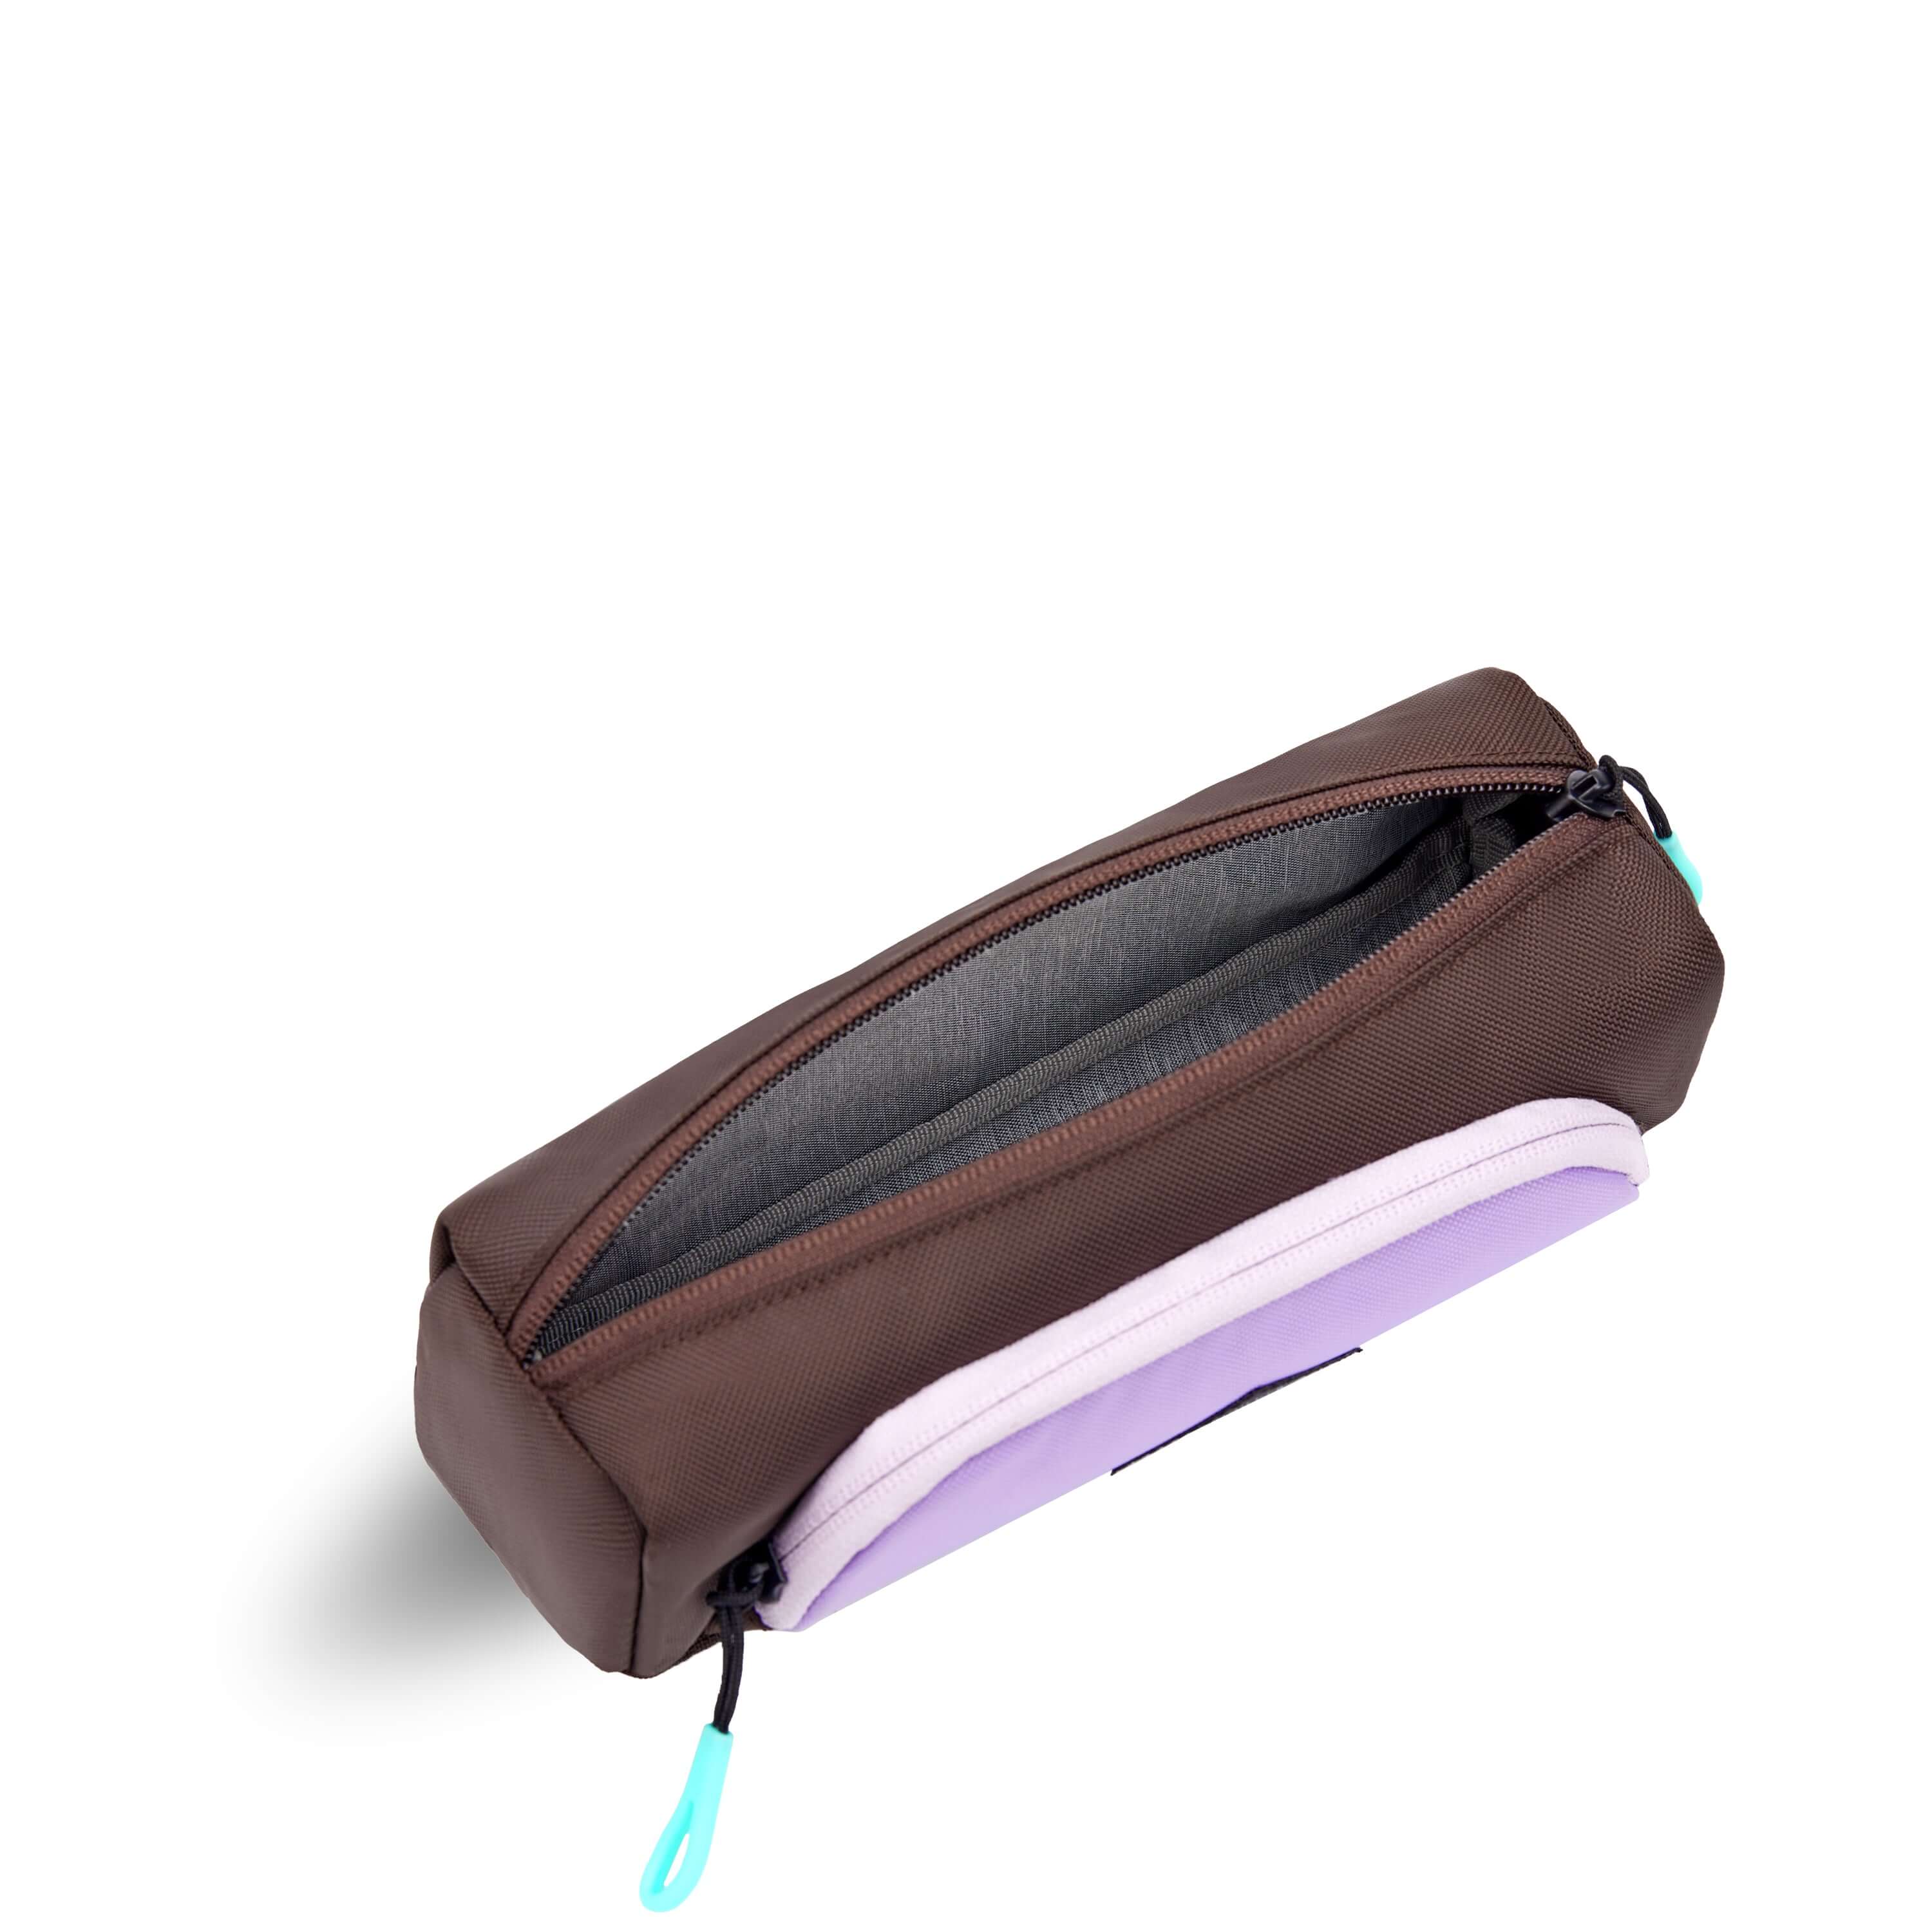 Top view of Sherpani travel accessory, the Poet in Lavender. The pouch is unzipped to reveal a light gray interior.